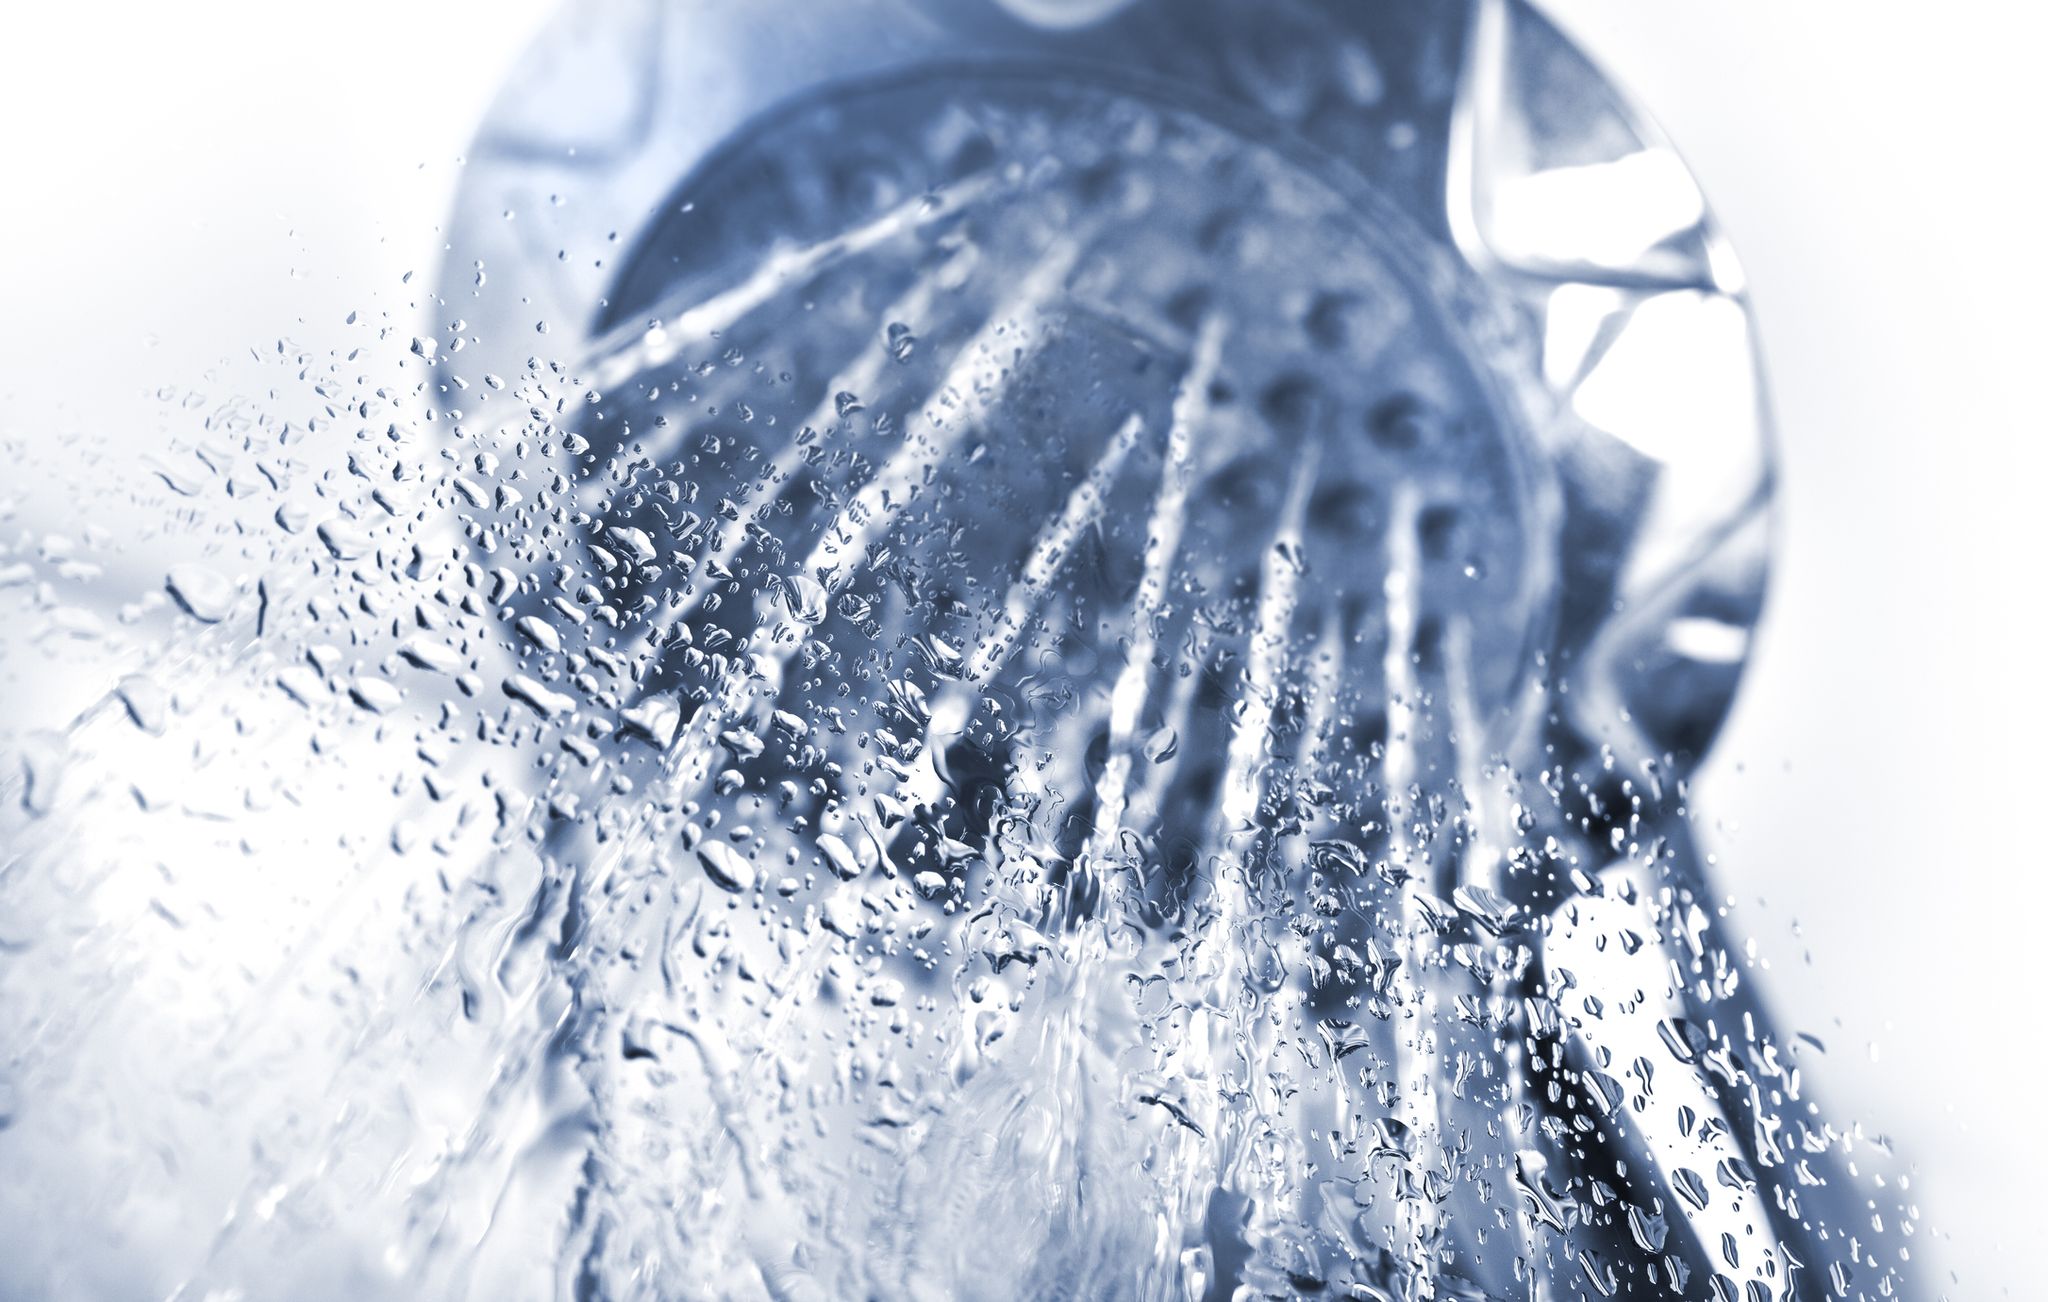 6 cold shower benefits to consider